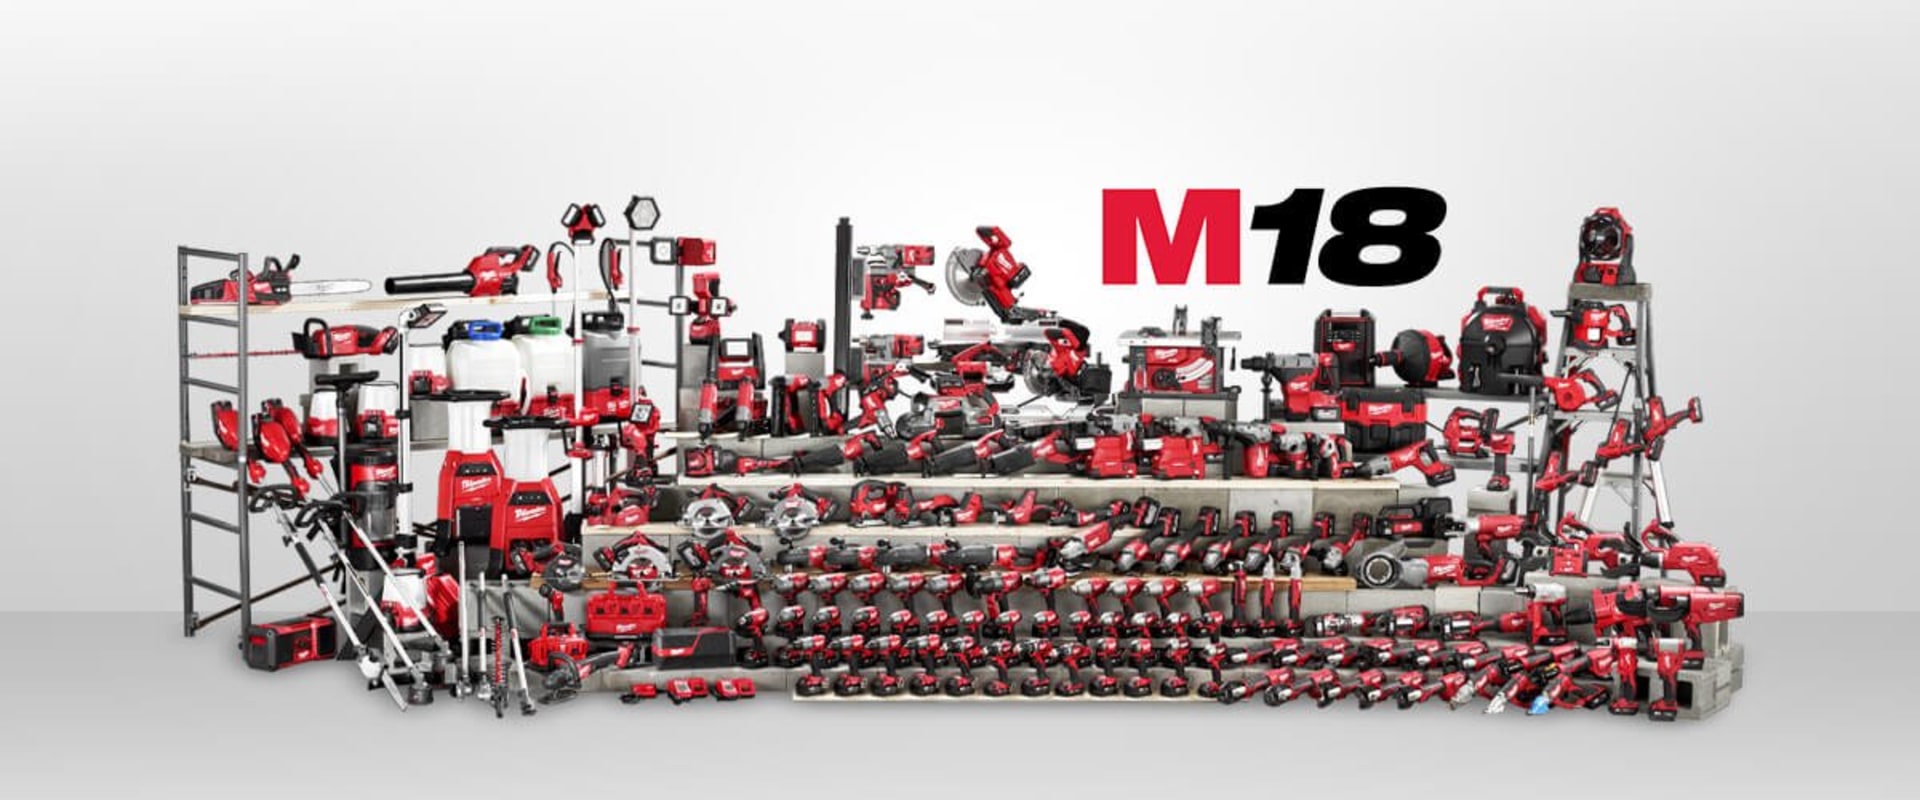 What milwaukee tools are best?